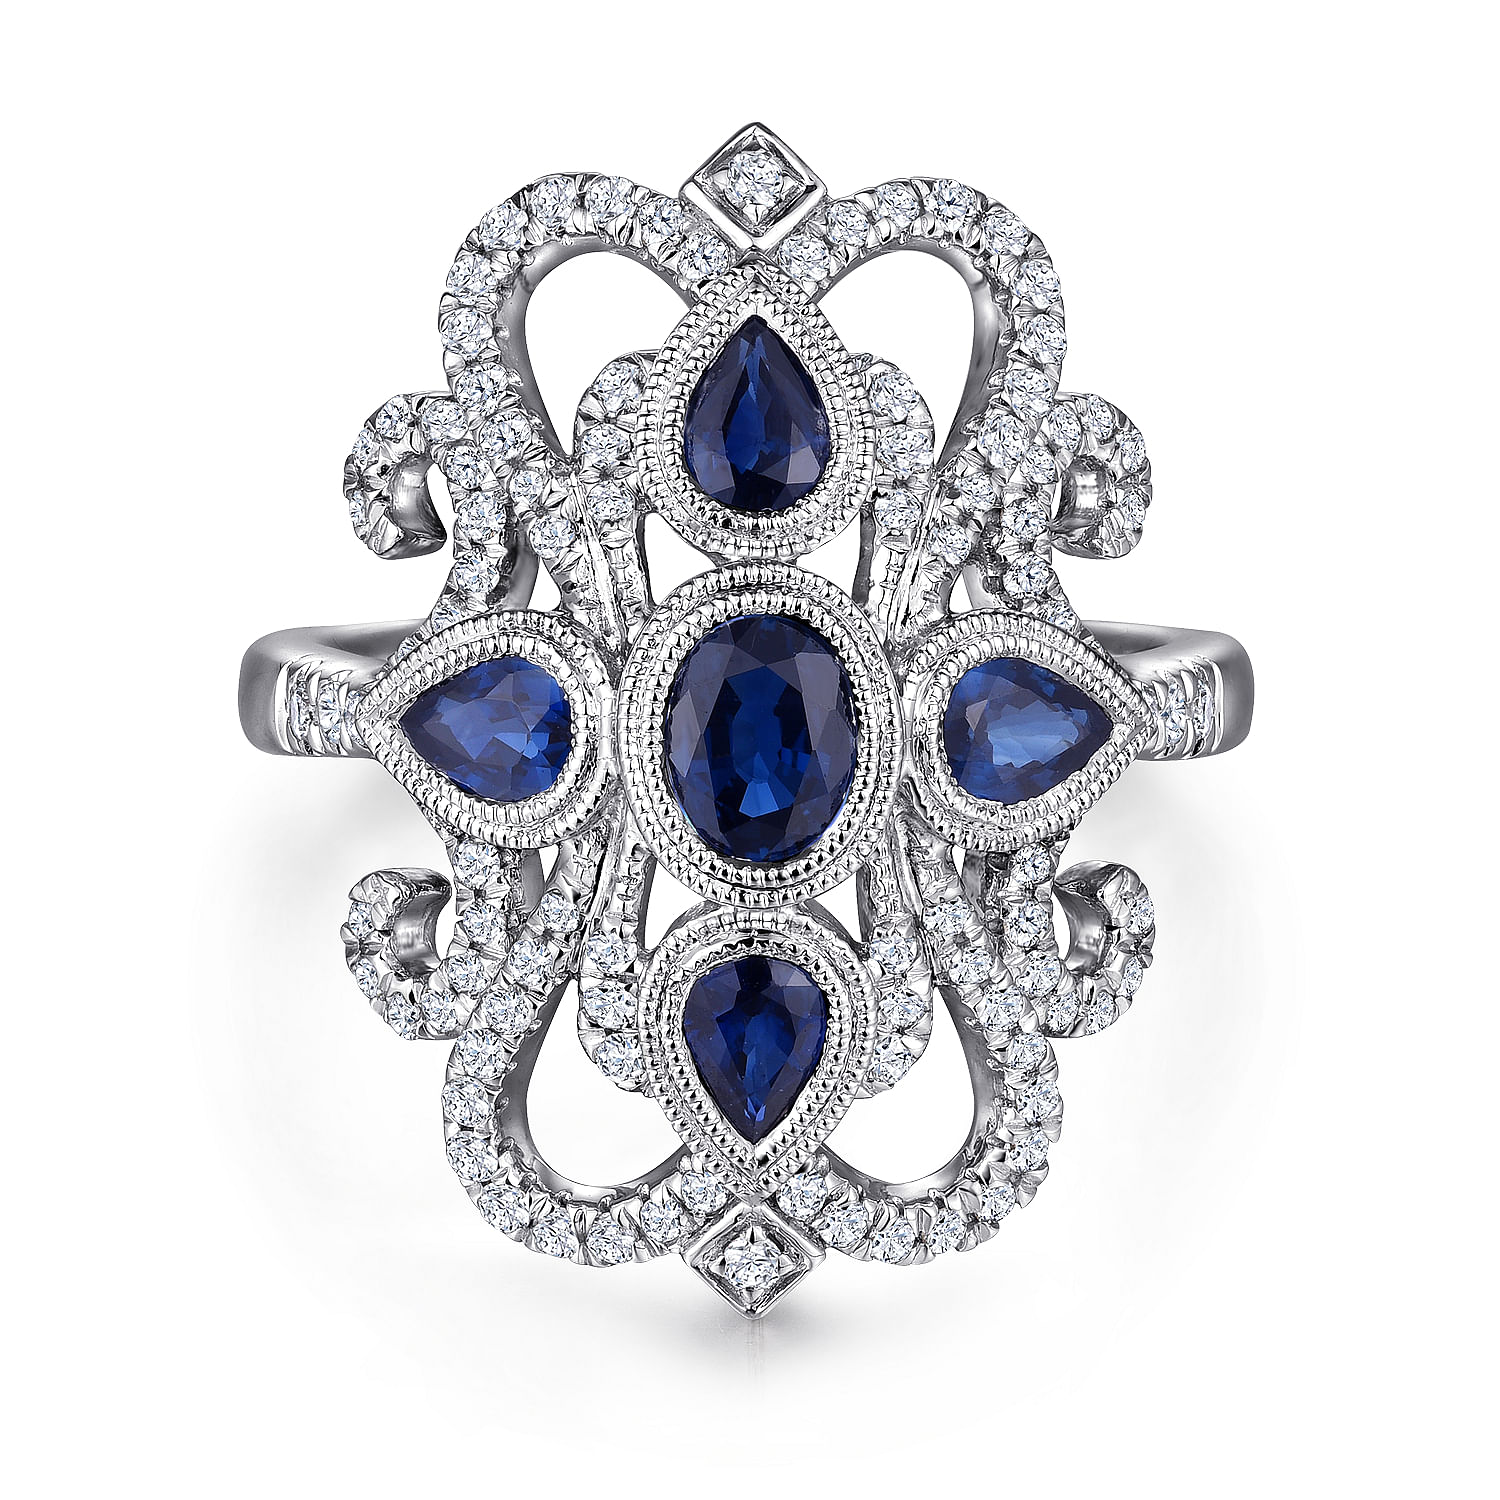 Vintage 14K White Gold Dramatic Sapphire and Pave Diamond Ring